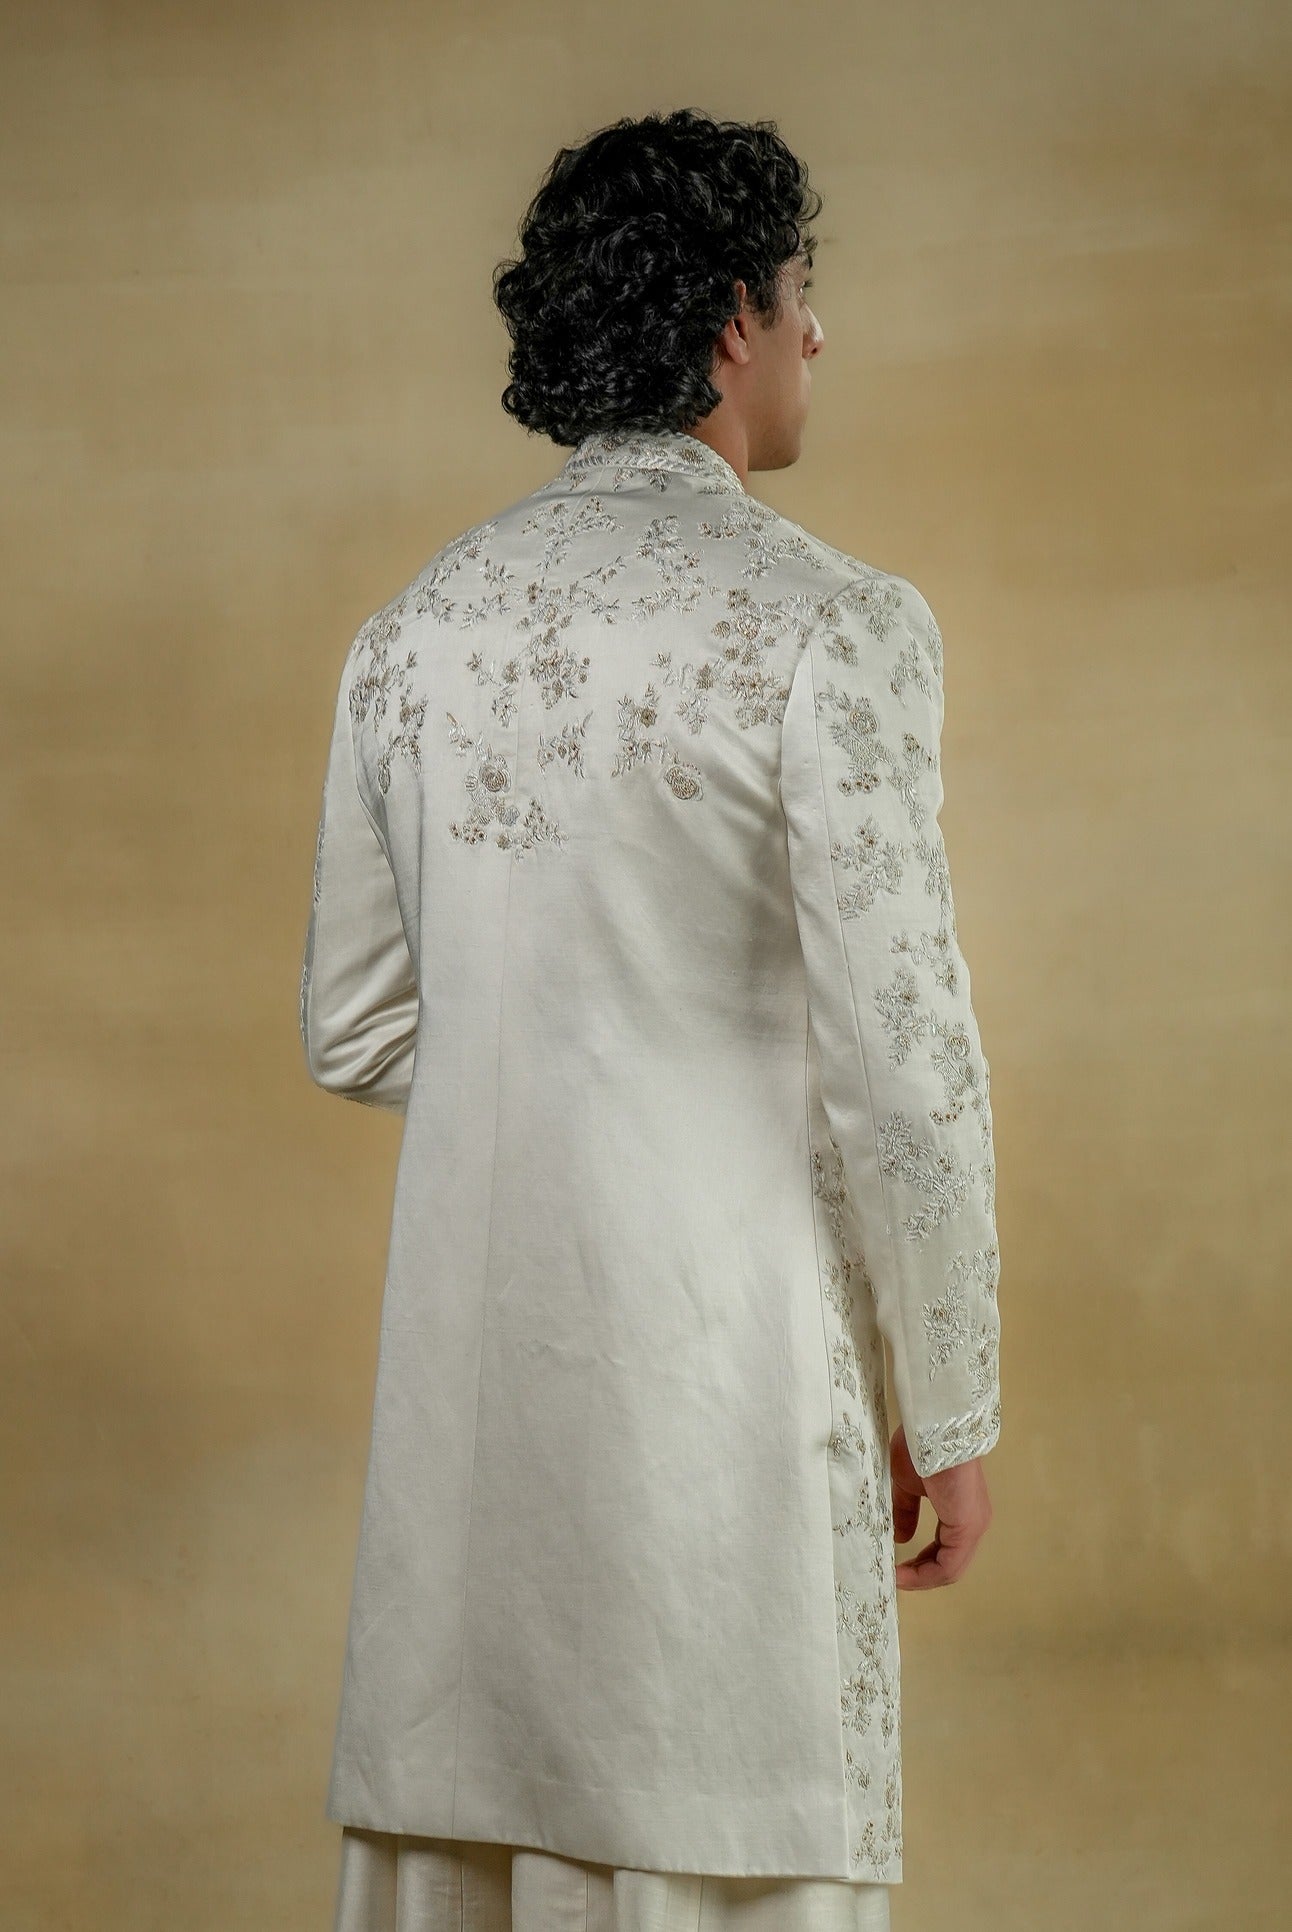 Back view of the Gardenia White Sherwani, featuring understated embellishments and a tailored fit.